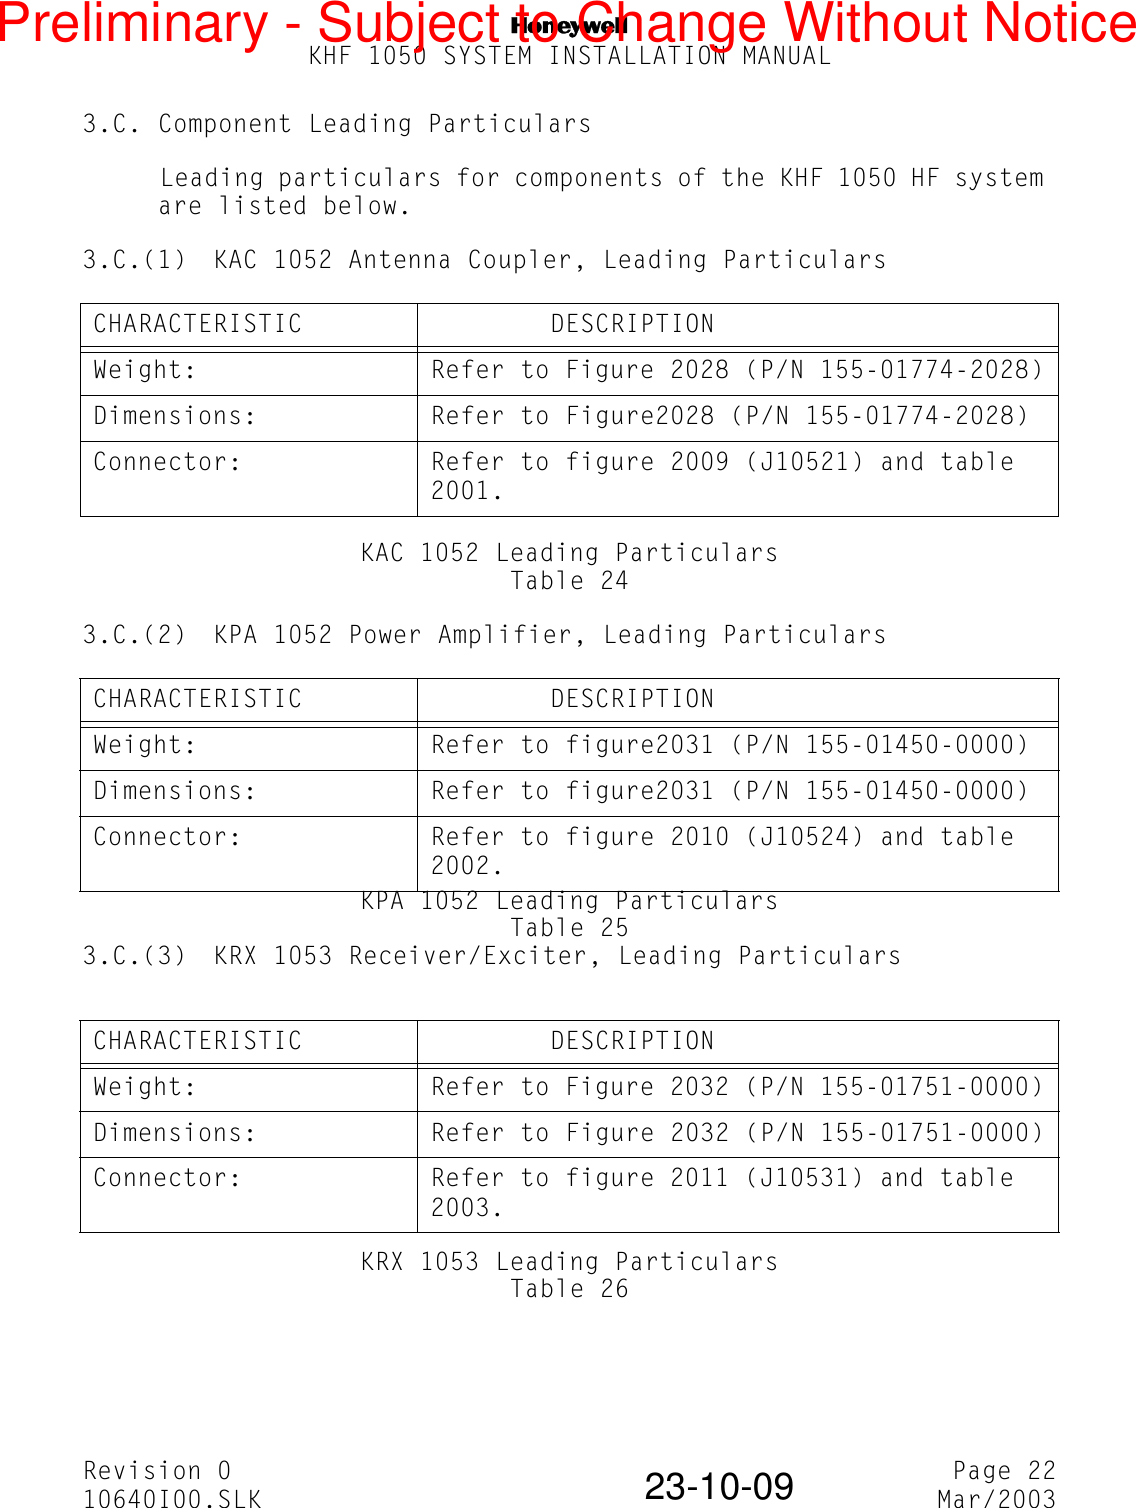 NKHF 1050 SYSTEM INSTALLATION MANUALRevision 0 Page 2210640I00.SLK Mar/200323-10-093.C. Component Leading ParticularsLeading particulars for components of the KHF 1050 HF system are listed below.3.C.(1) KAC 1052 Antenna Coupler, Leading ParticularsKAC 1052 Leading ParticularsTable 243.C.(2) KPA 1052 Power Amplifier, Leading ParticularsKPA 1052 Leading ParticularsTable 253.C.(3) KRX 1053 Receiver/Exciter, Leading ParticularsKRX 1053 Leading ParticularsTable 26CHARACTERISTIC         DESCRIPTIONWeight: Refer to Figure 2028 (P/N 155-01774-2028)Dimensions: Refer to Figure2028 (P/N 155-01774-2028)Connector: Refer to figure 2009 (J10521) and table 2001.CHARACTERISTIC         DESCRIPTIONWeight: Refer to figure2031 (P/N 155-01450-0000) Dimensions: Refer to figure2031 (P/N 155-01450-0000) Connector: Refer to figure 2010 (J10524) and table 2002.CHARACTERISTIC         DESCRIPTIONWeight: Refer to Figure 2032 (P/N 155-01751-0000)Dimensions: Refer to Figure 2032 (P/N 155-01751-0000)Connector: Refer to figure 2011 (J10531) and table 2003.Preliminary - Subject to Change Without Notice